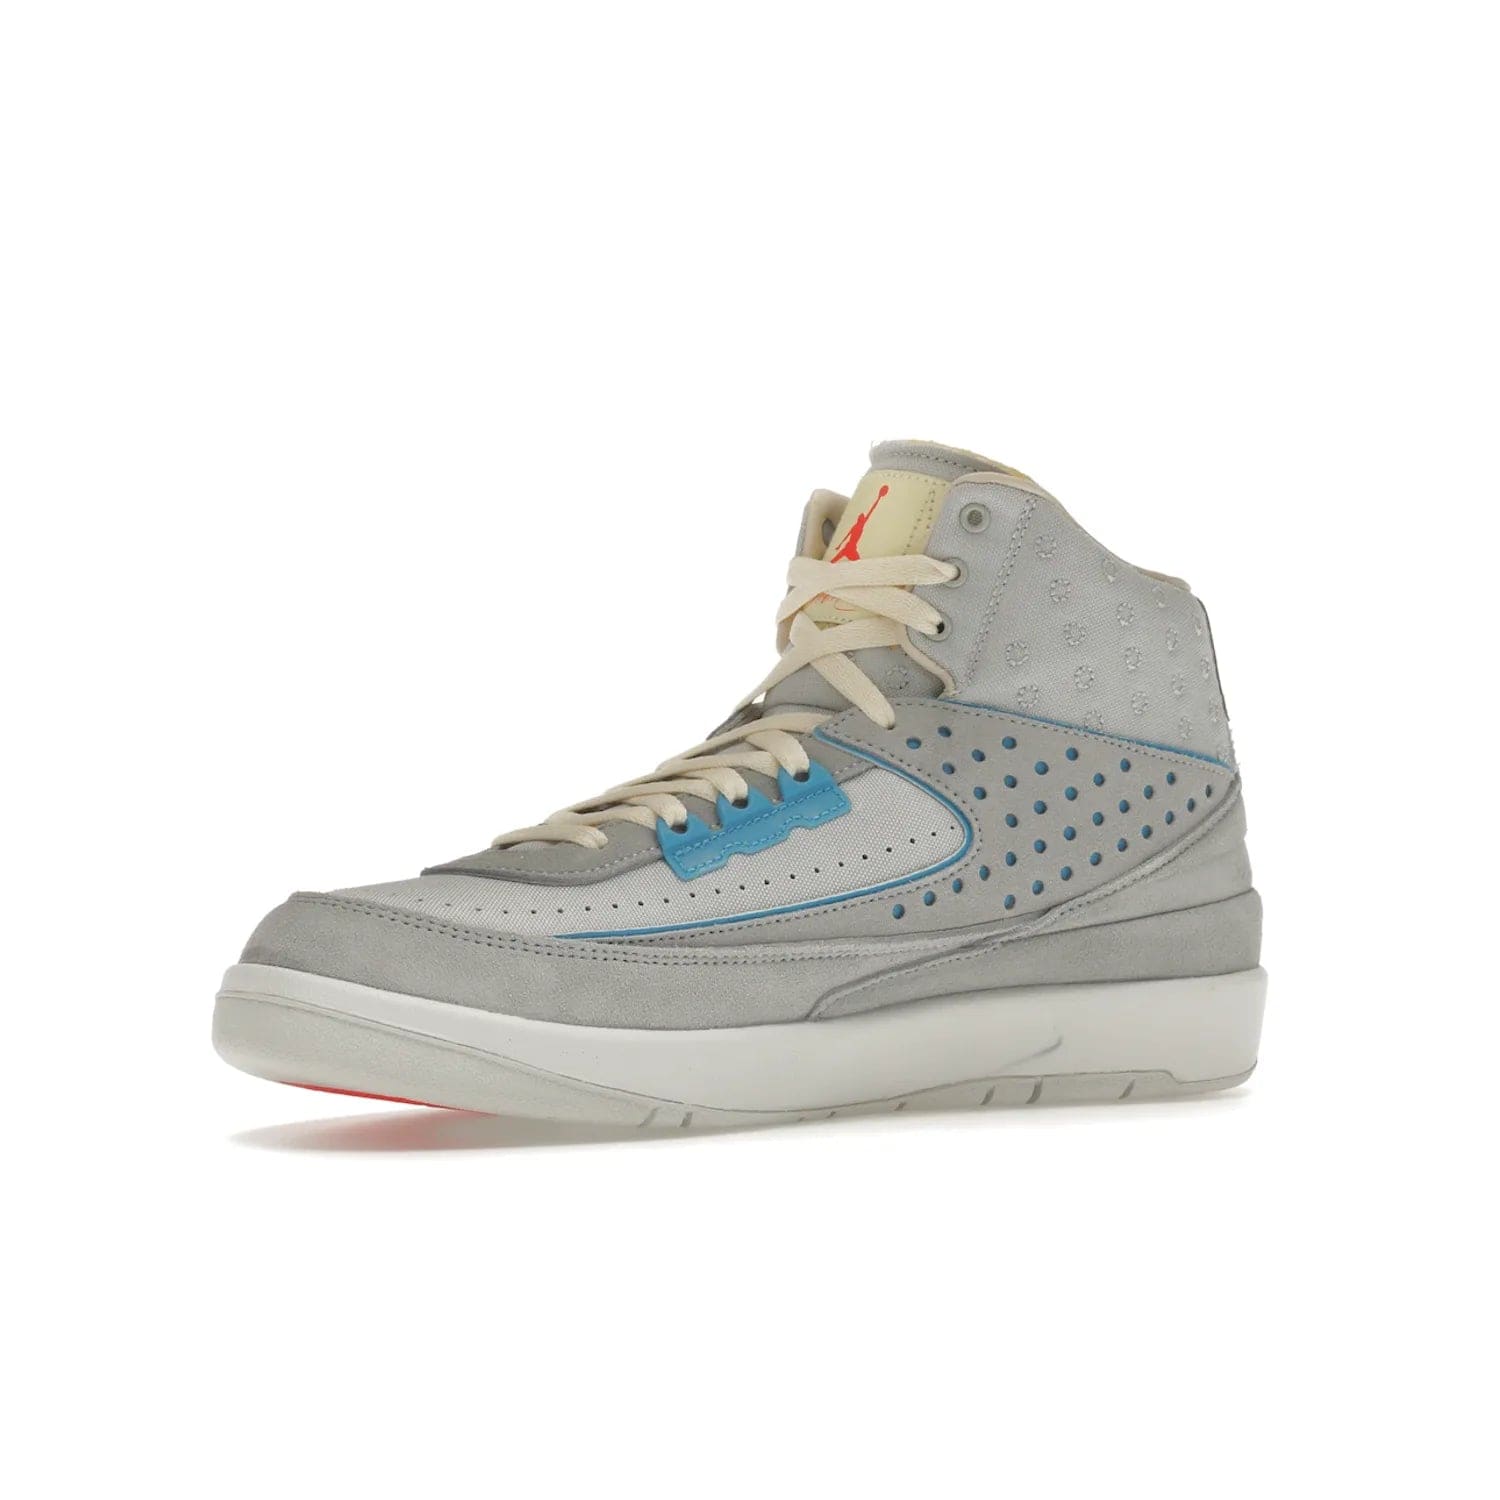 Jordan 2 Retro SP Union Grey Fog - Image 16 - Only at www.BallersClubKickz.com - Introducing the Air Jordan 2 Retro SP Union Grey Fog. This intricate sneaker design features a grey canvas upper with light blue eyelets, eyestay patches, and piping, plus custom external tags. Dropping in April 2022, this exclusive release offers a worn-in look and feel.